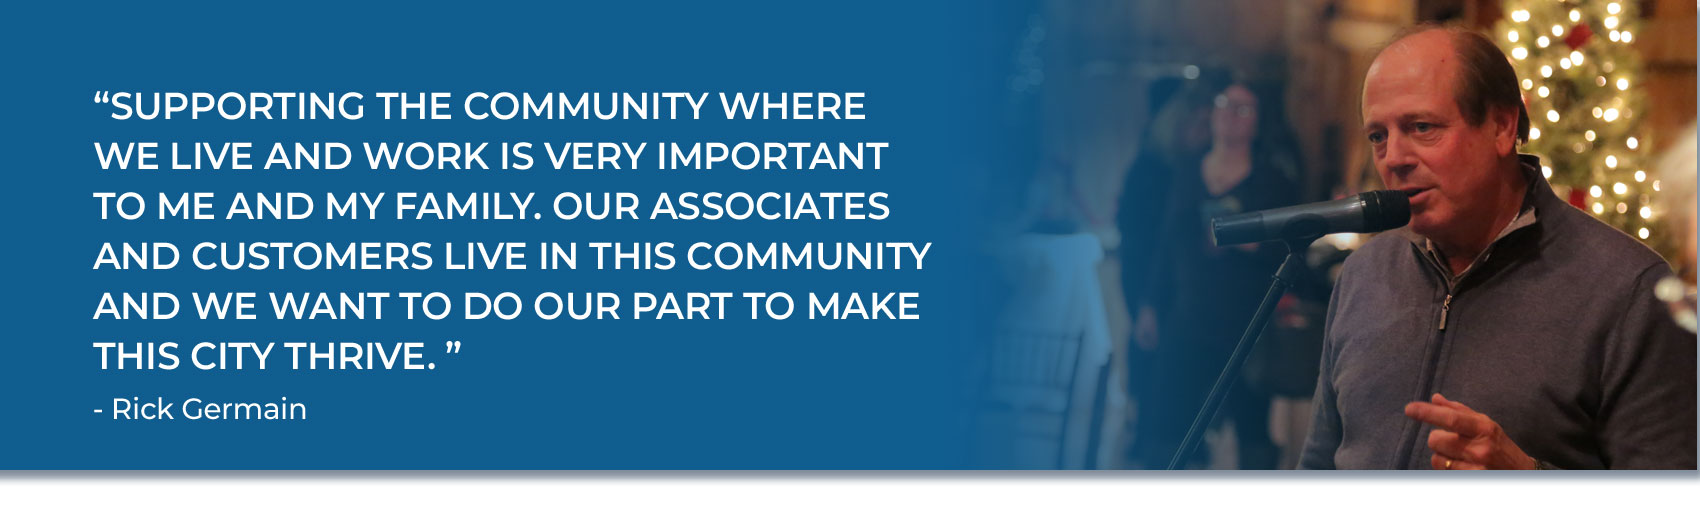 Quote by Rick Germain - Supporting the community where we live and work is very important to me and my family. Our associates and customers live in this community and we want to do our part to make this city thrive.